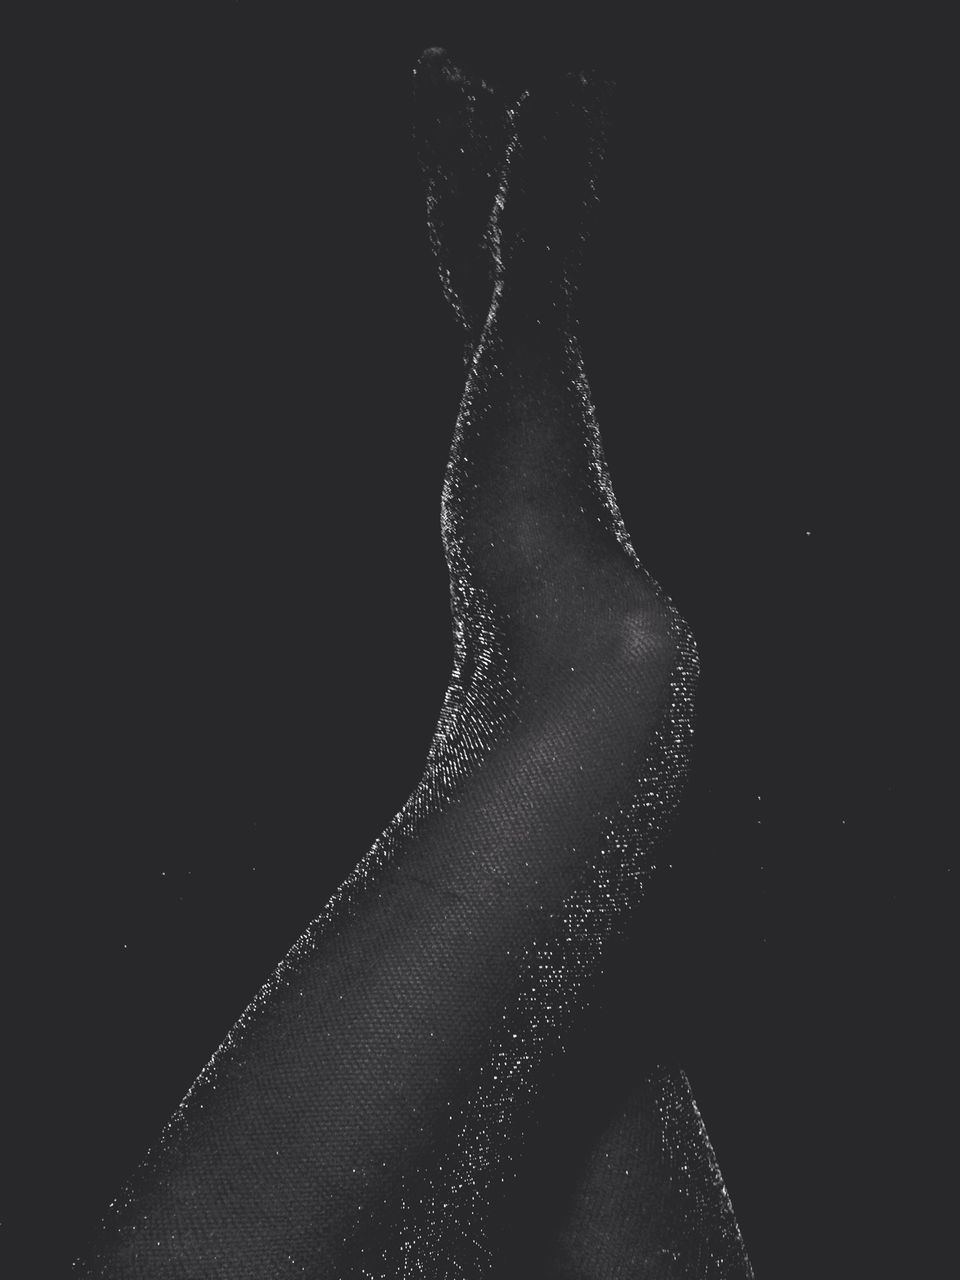 black background, studio shot, close-up, copy space, drop, water, indoors, part of, wet, motion, pattern, black color, night, natural pattern, dark, detail, person